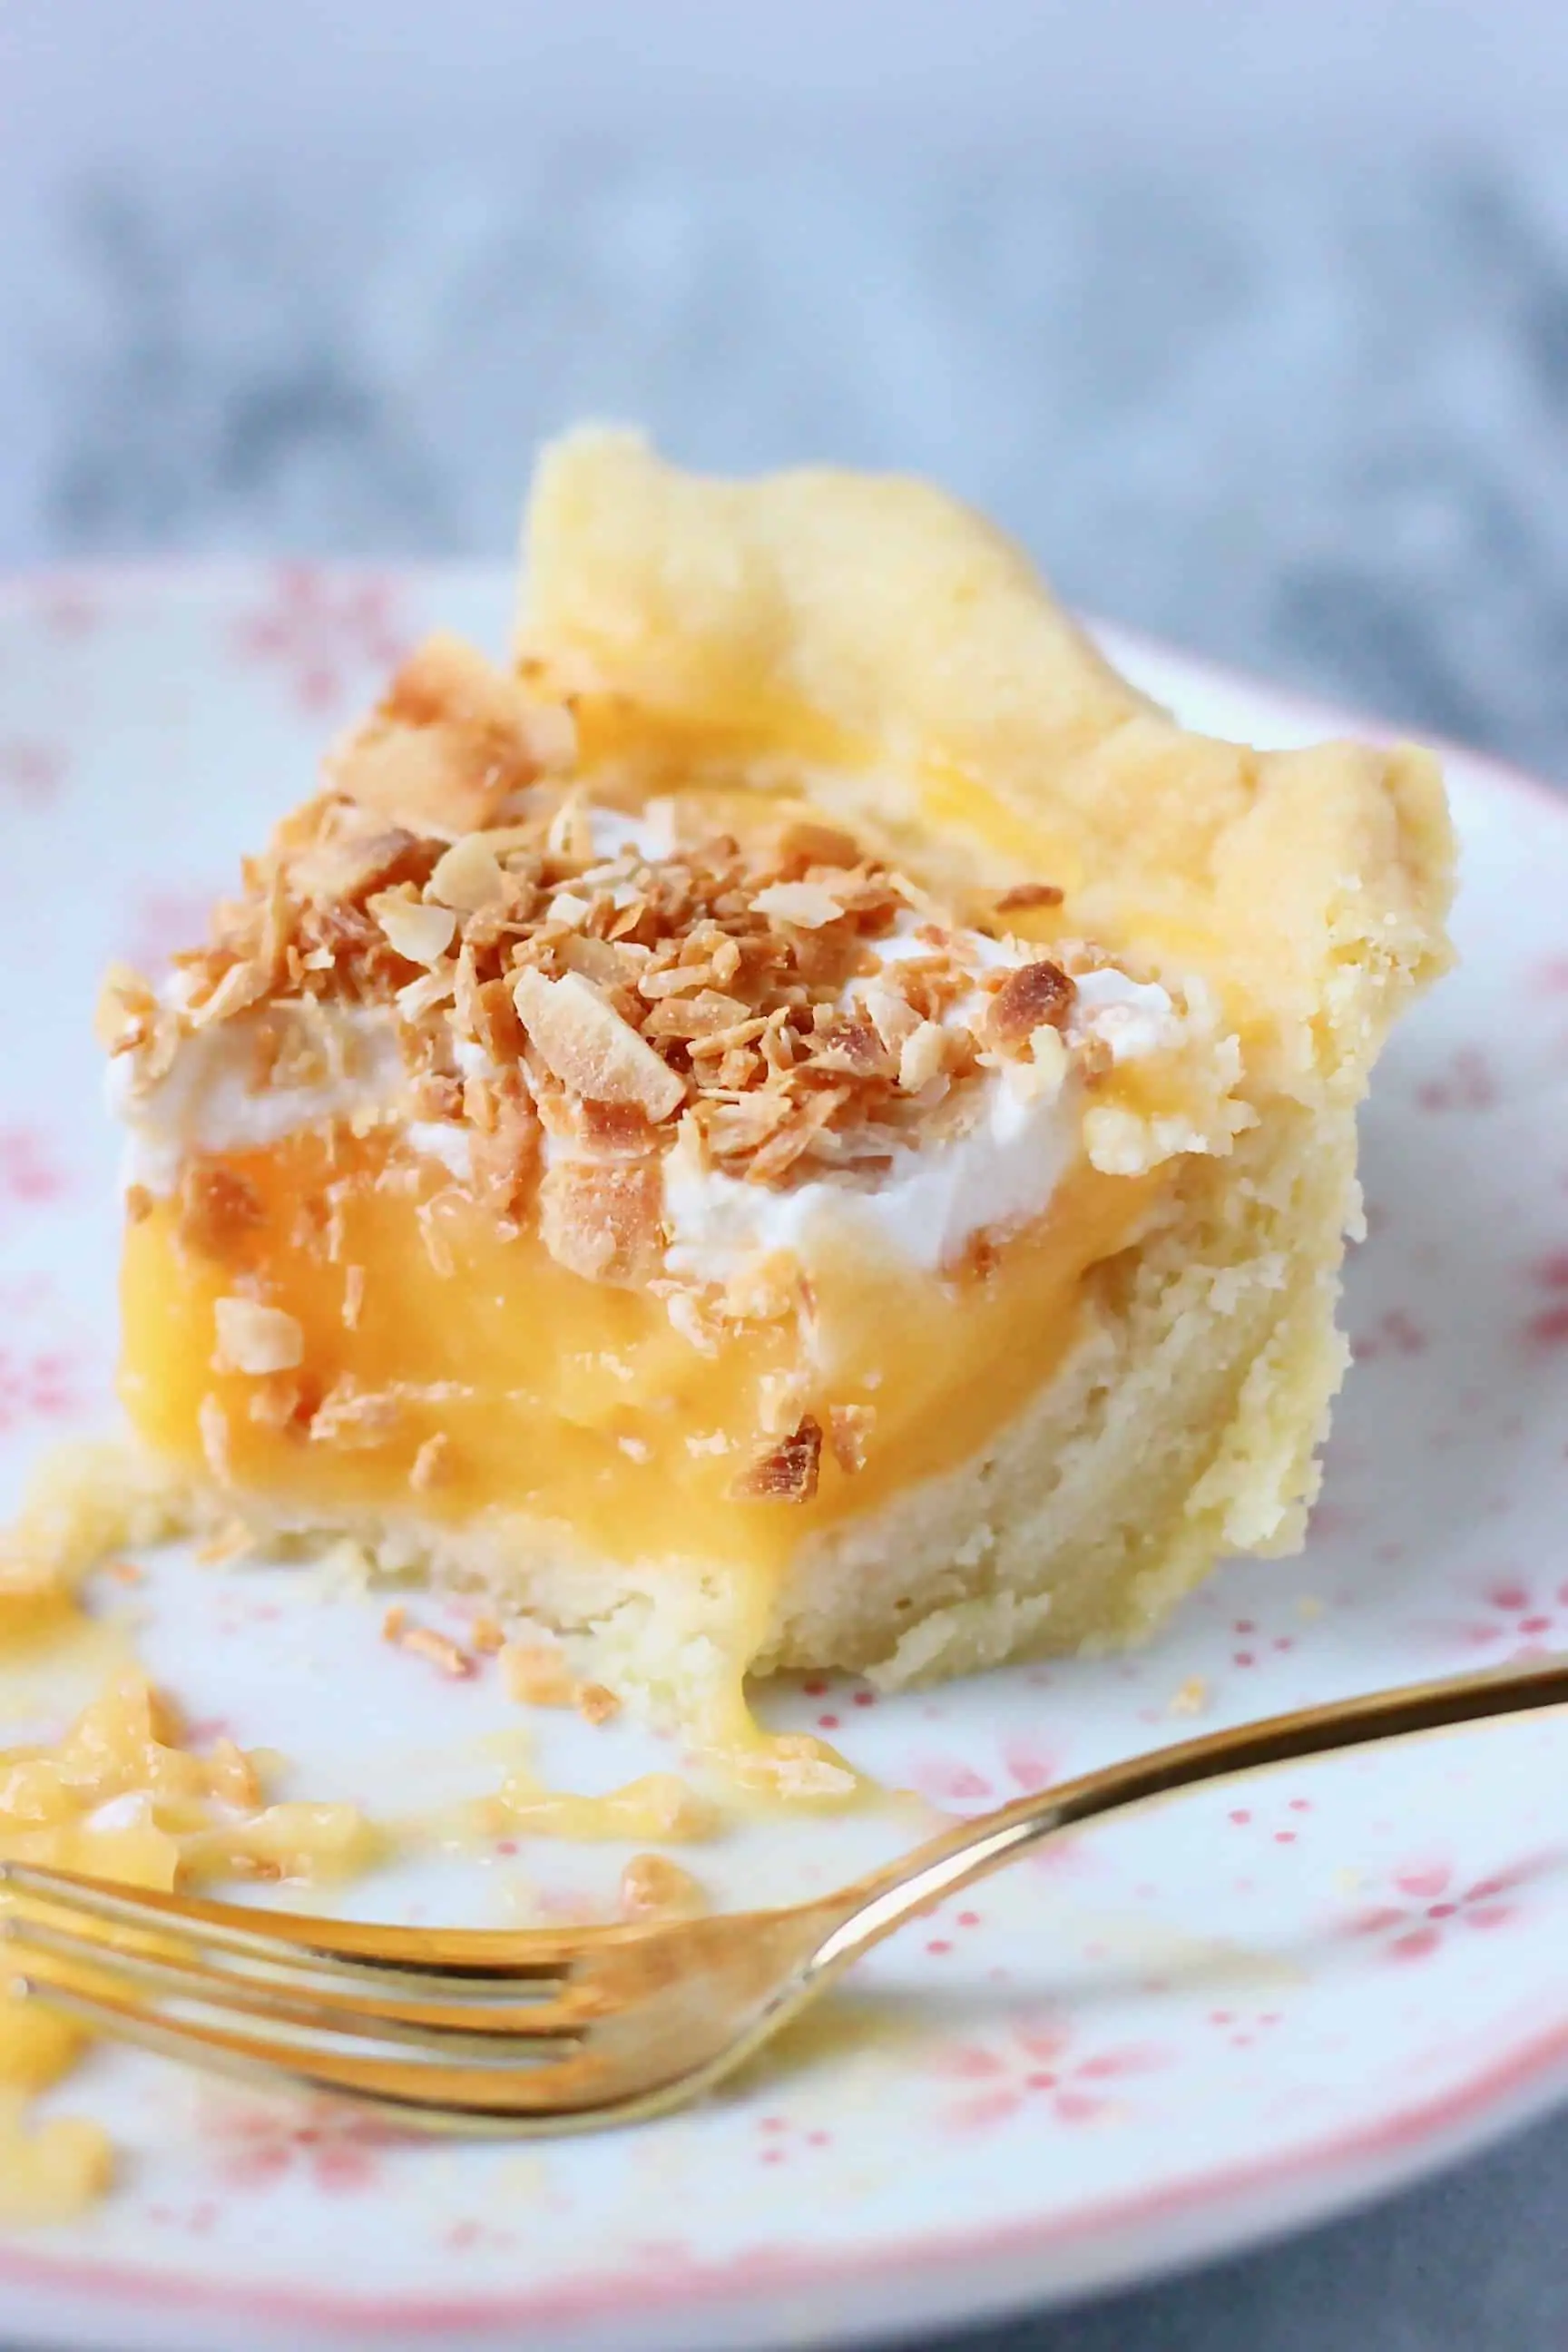 A slice of pie filled with lemon curd topped with cream and toasted coconut on a plate